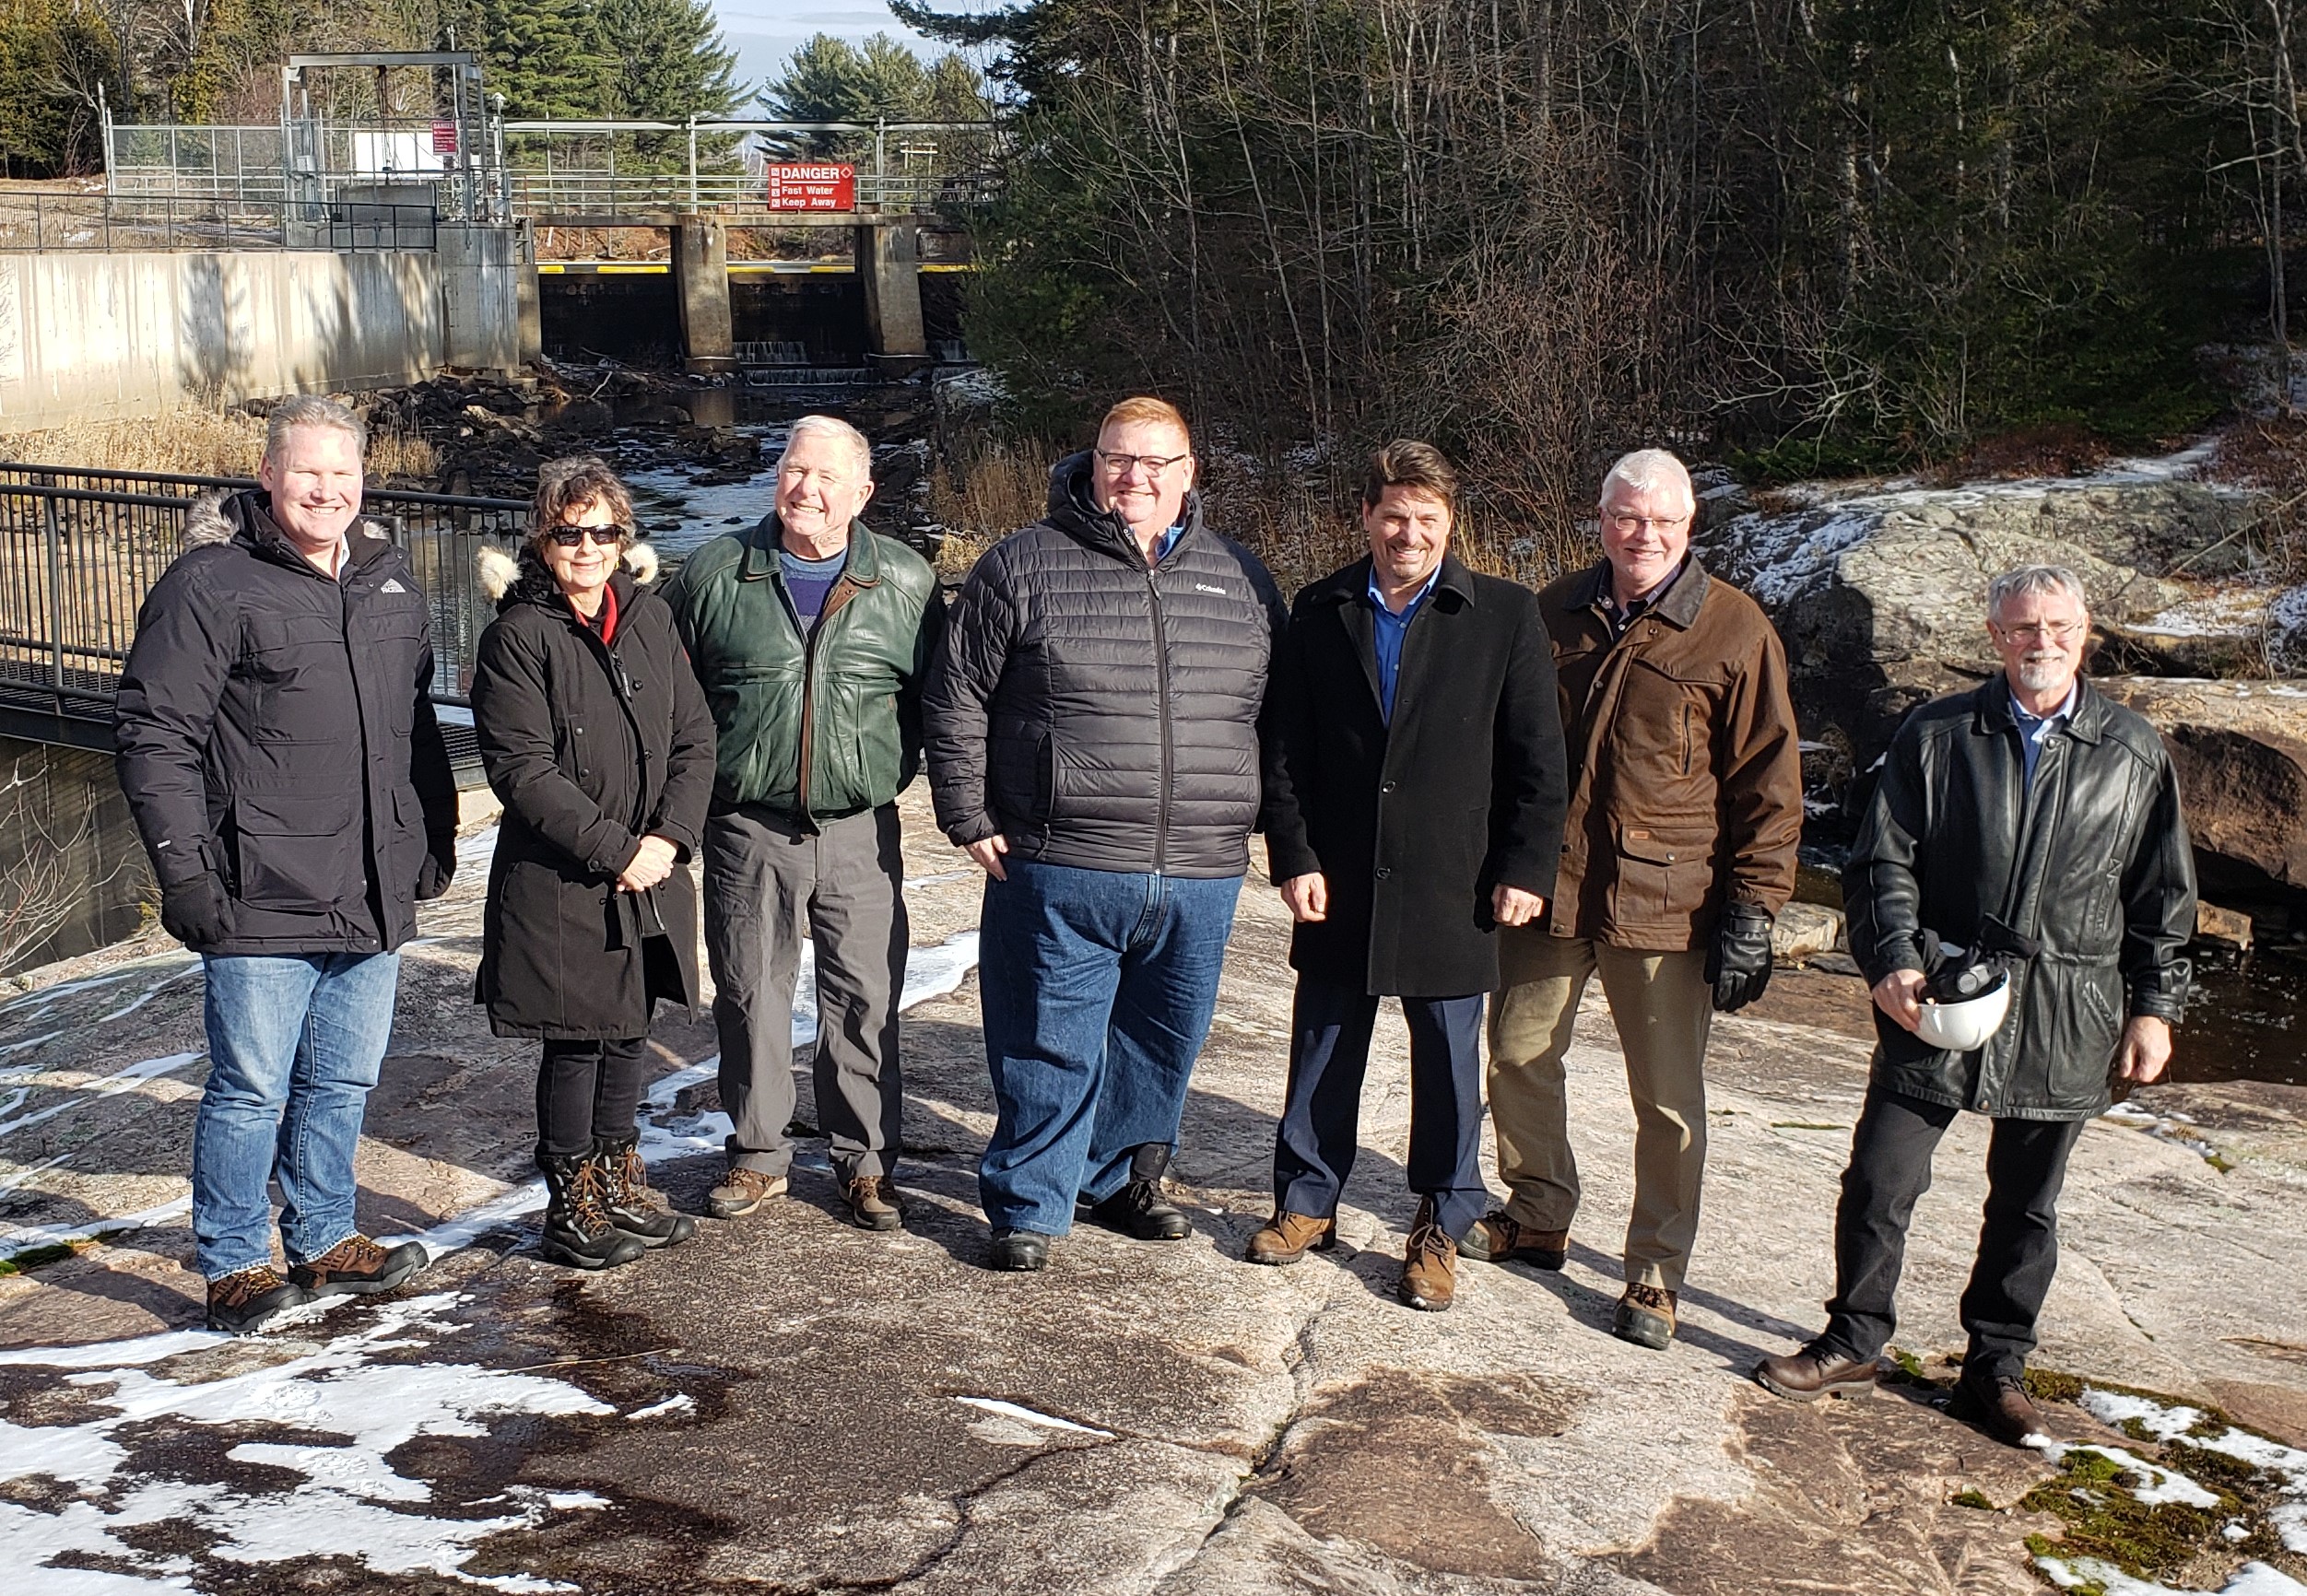 Minister Smith and guests standing in front of South River dam